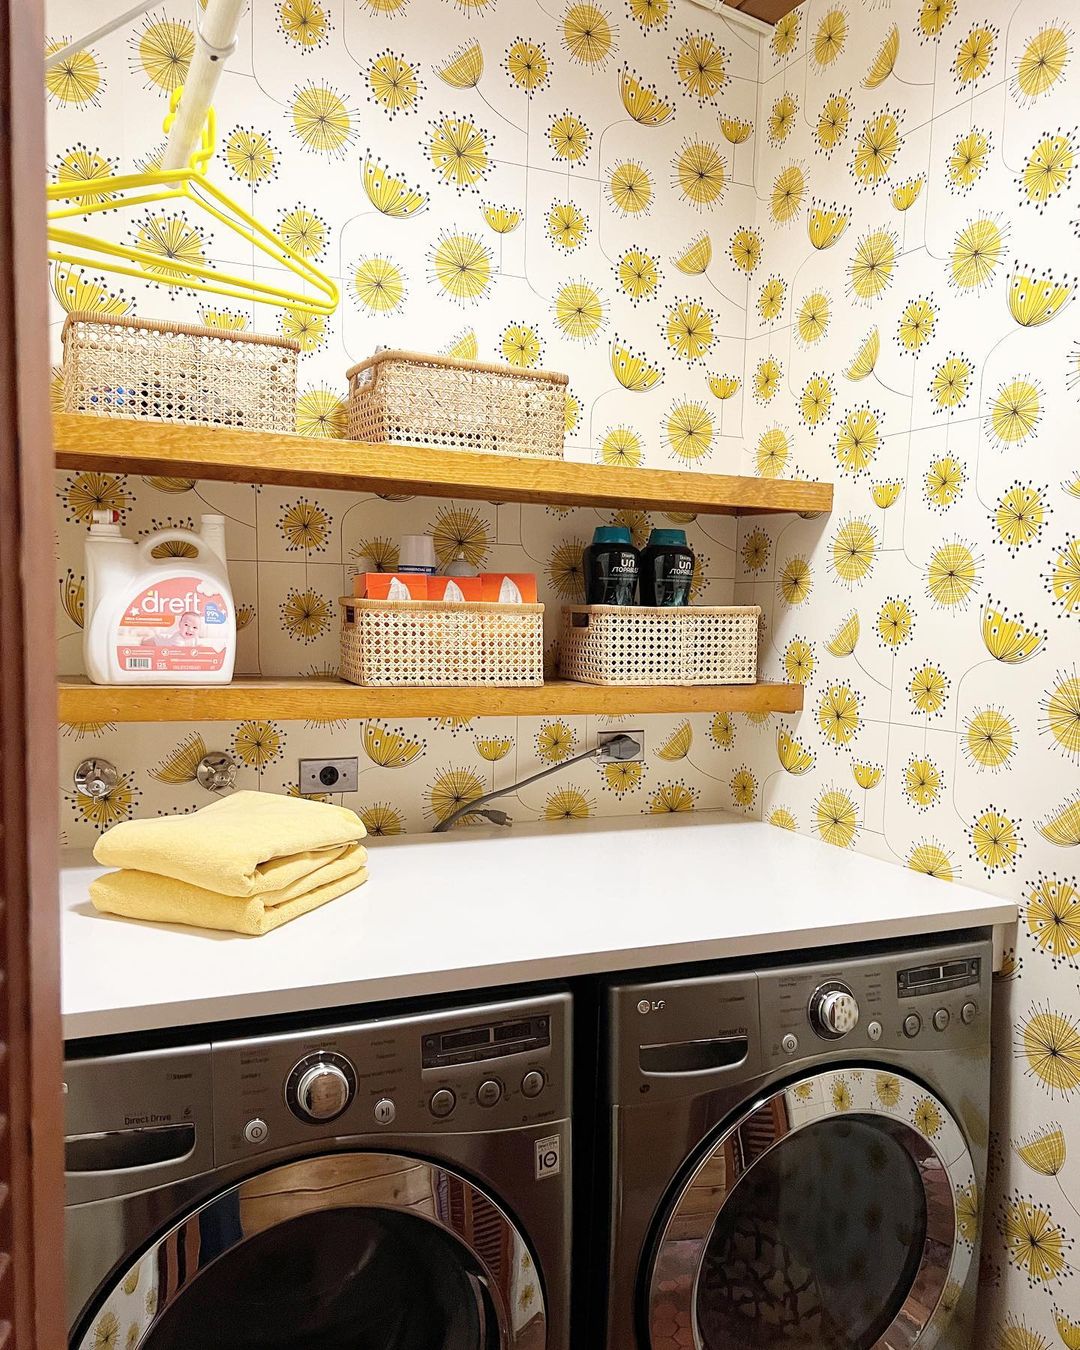 20. Sunny Dandelions for a Cheerful Laundry Room